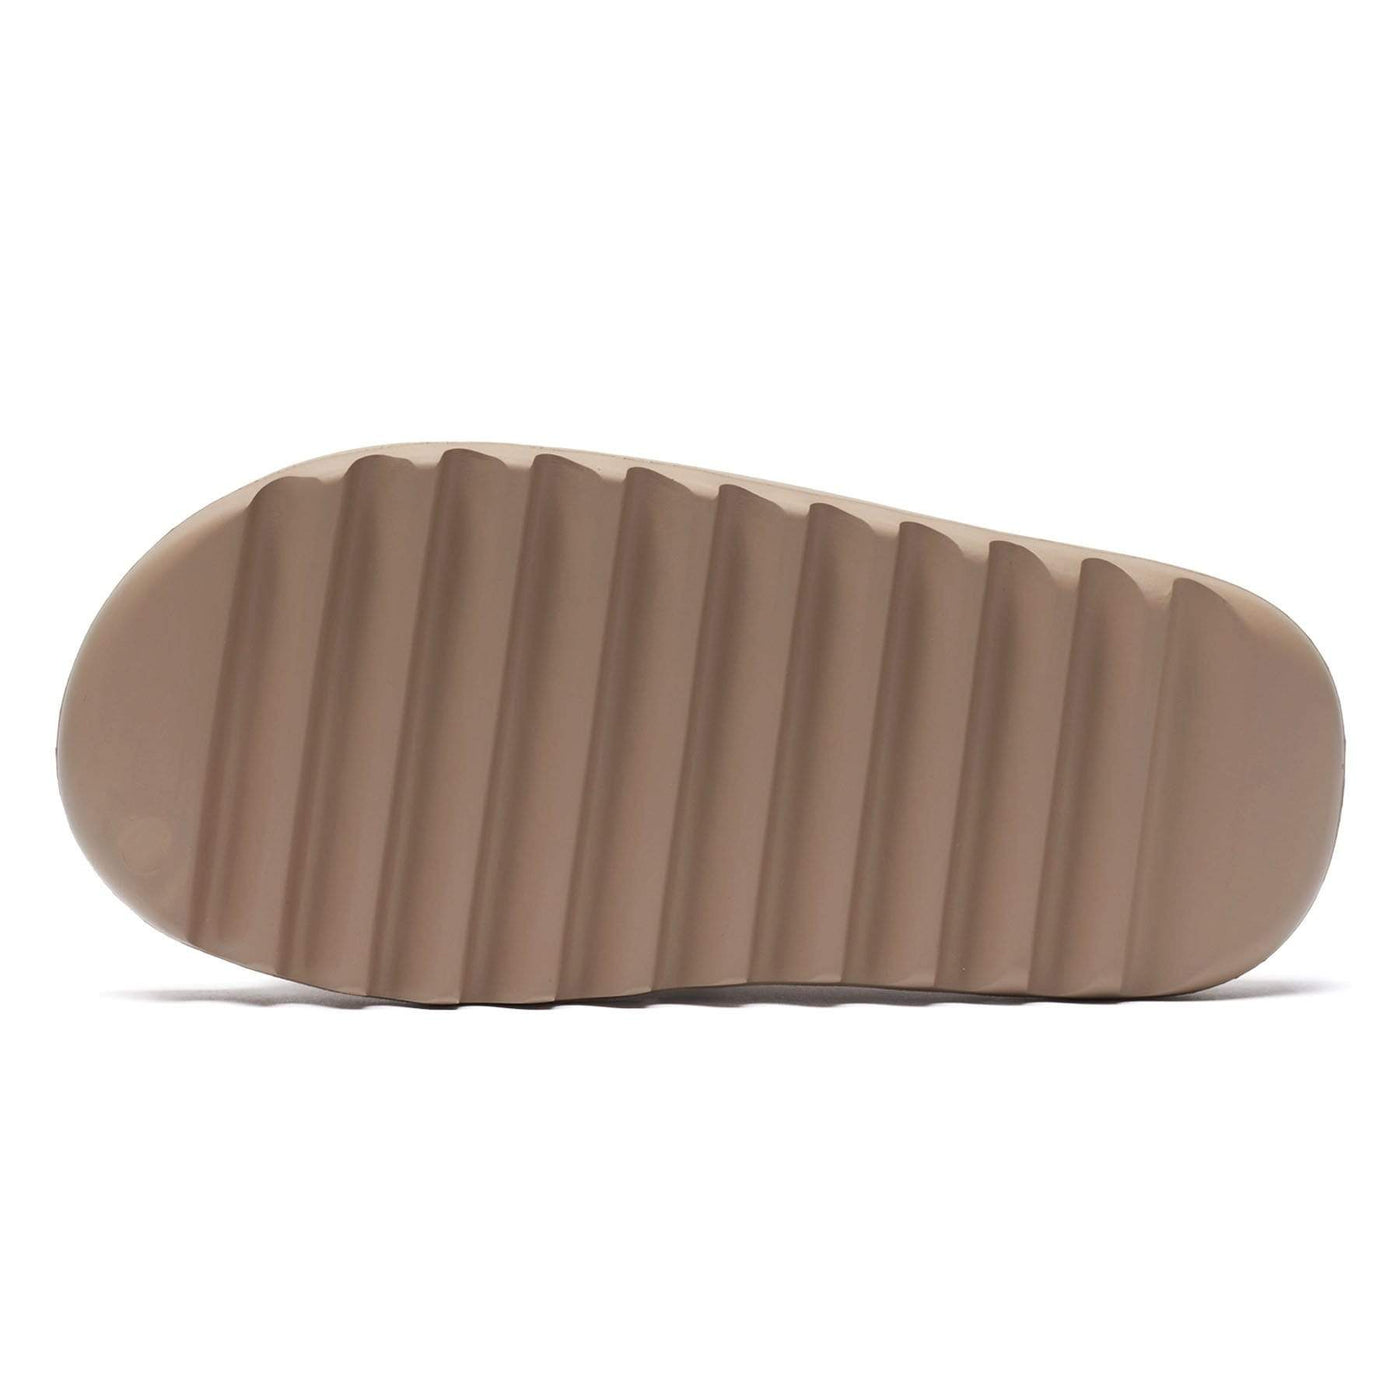 YEEZY SLIDES 'PURE' - NUDE